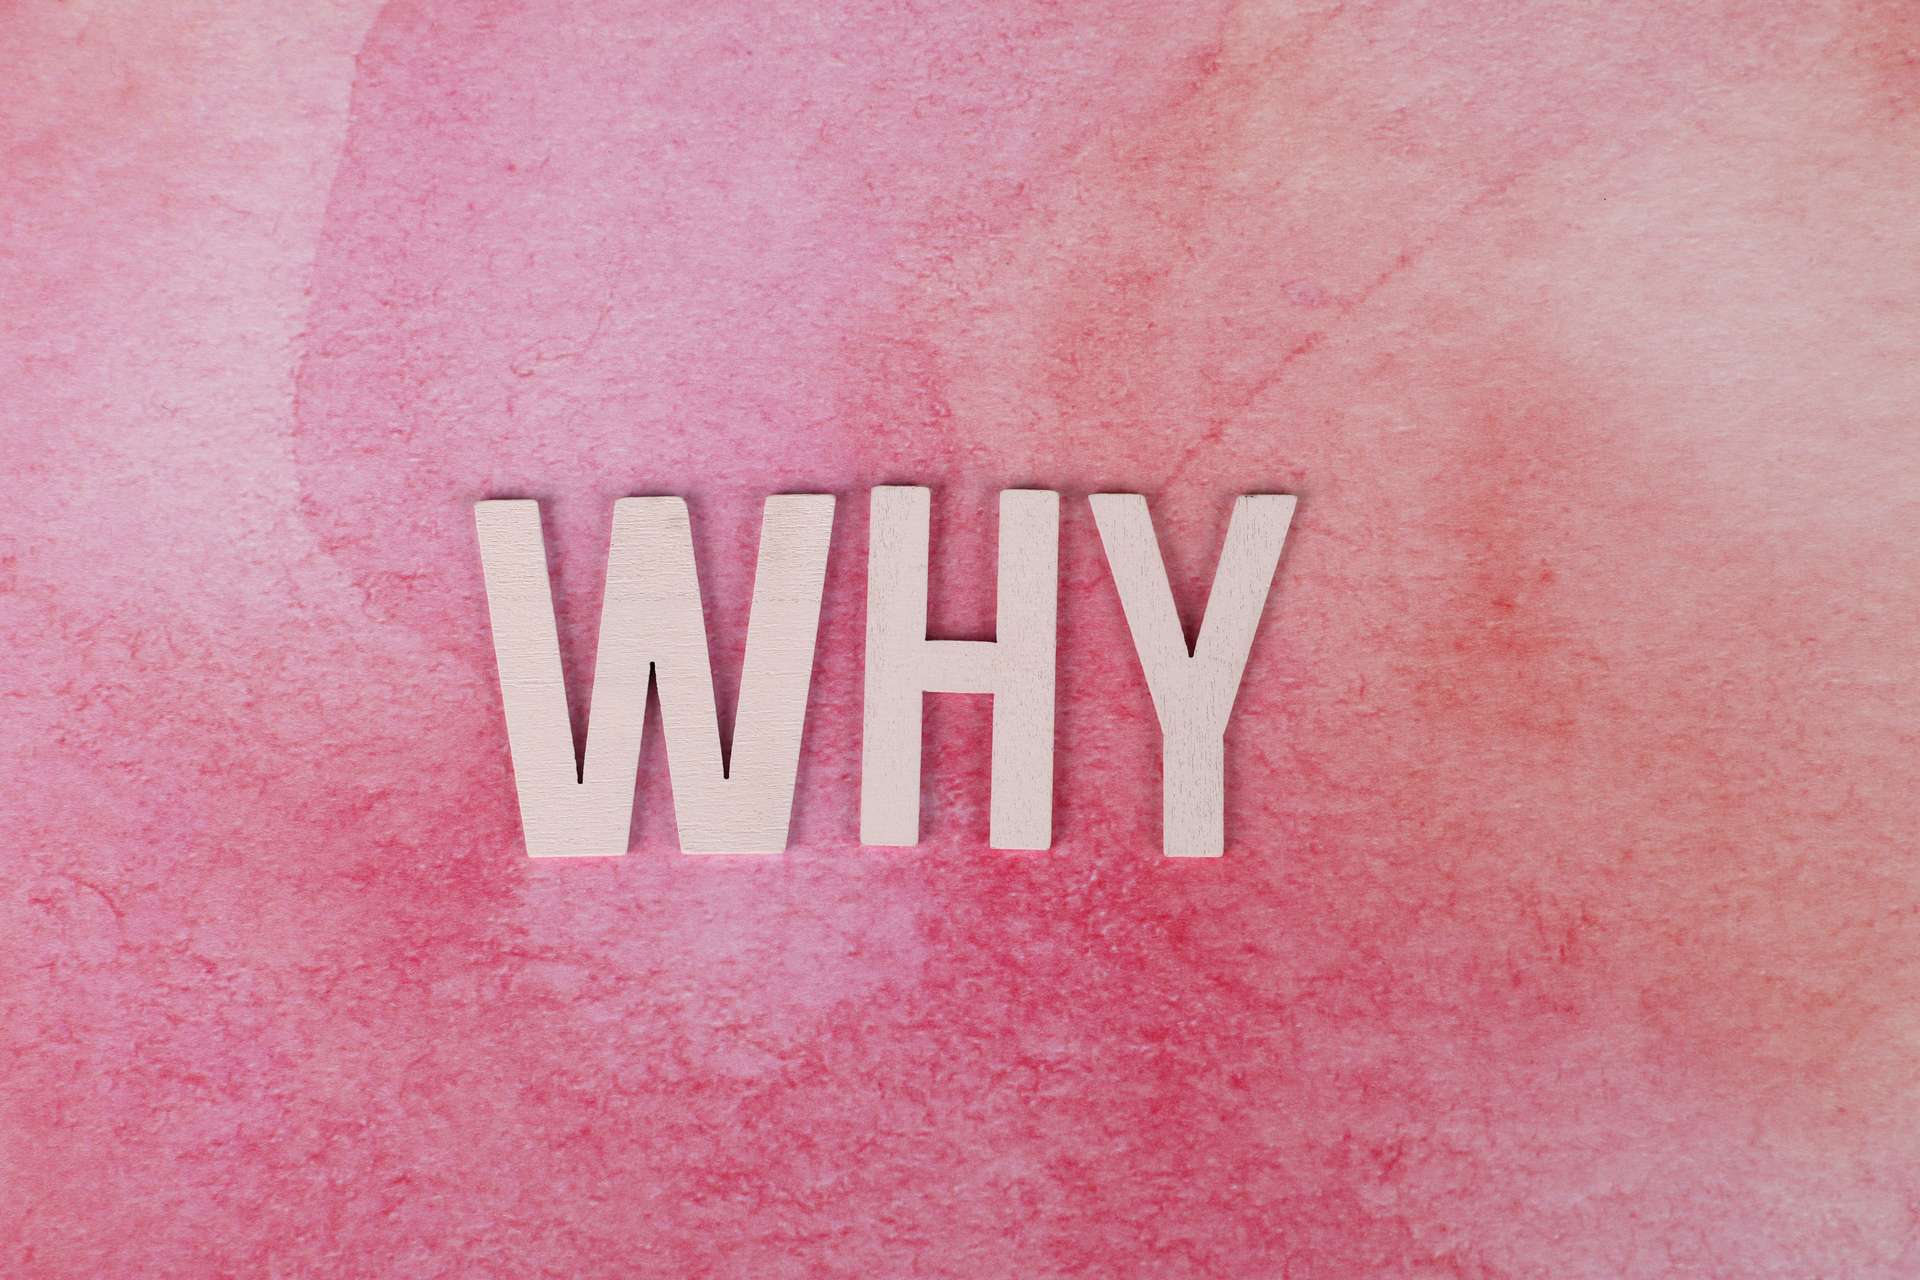 why, written on a pink background